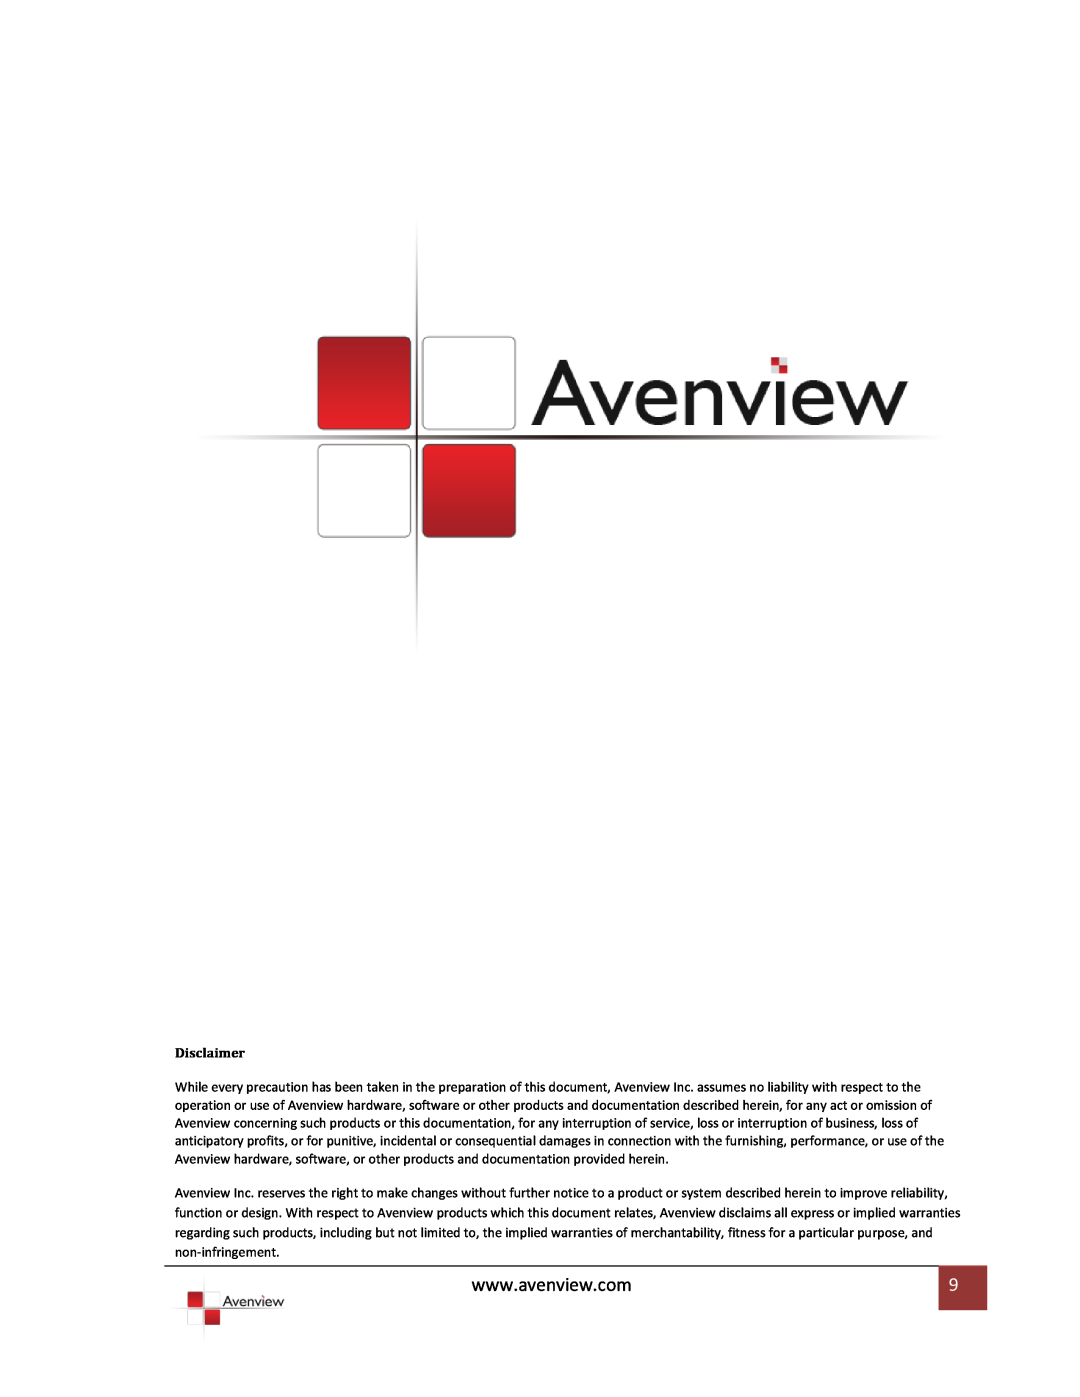 Avenview HDMI 3G/HD/SD-SDI specifications Disclaimer 